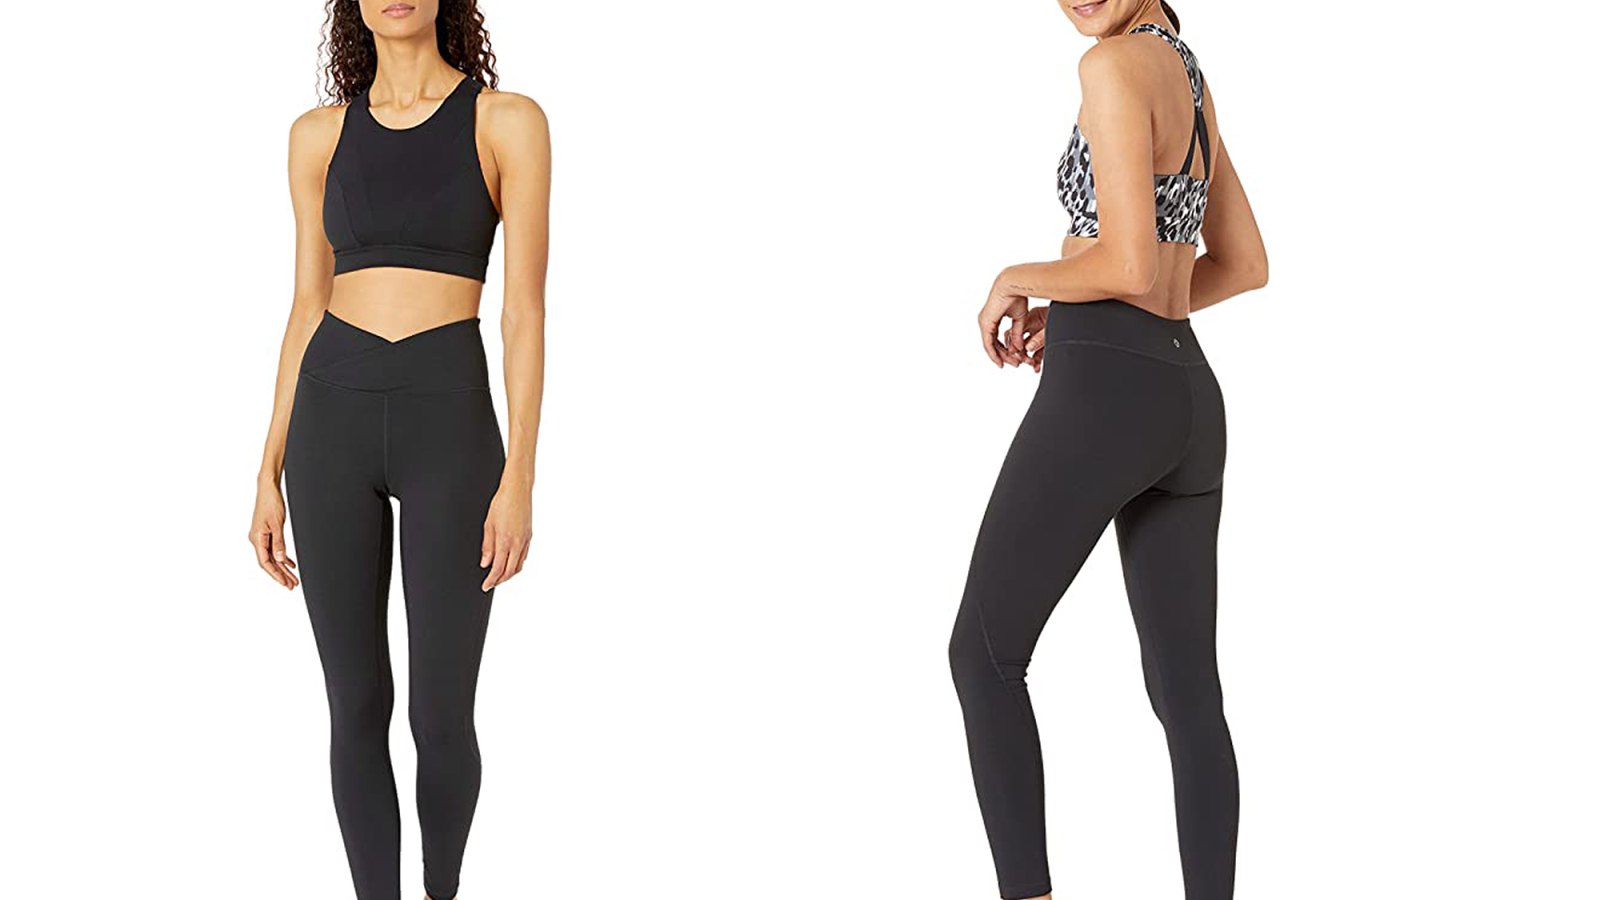 Prime Day: Build Your Own Leggings for Up to 51% Off